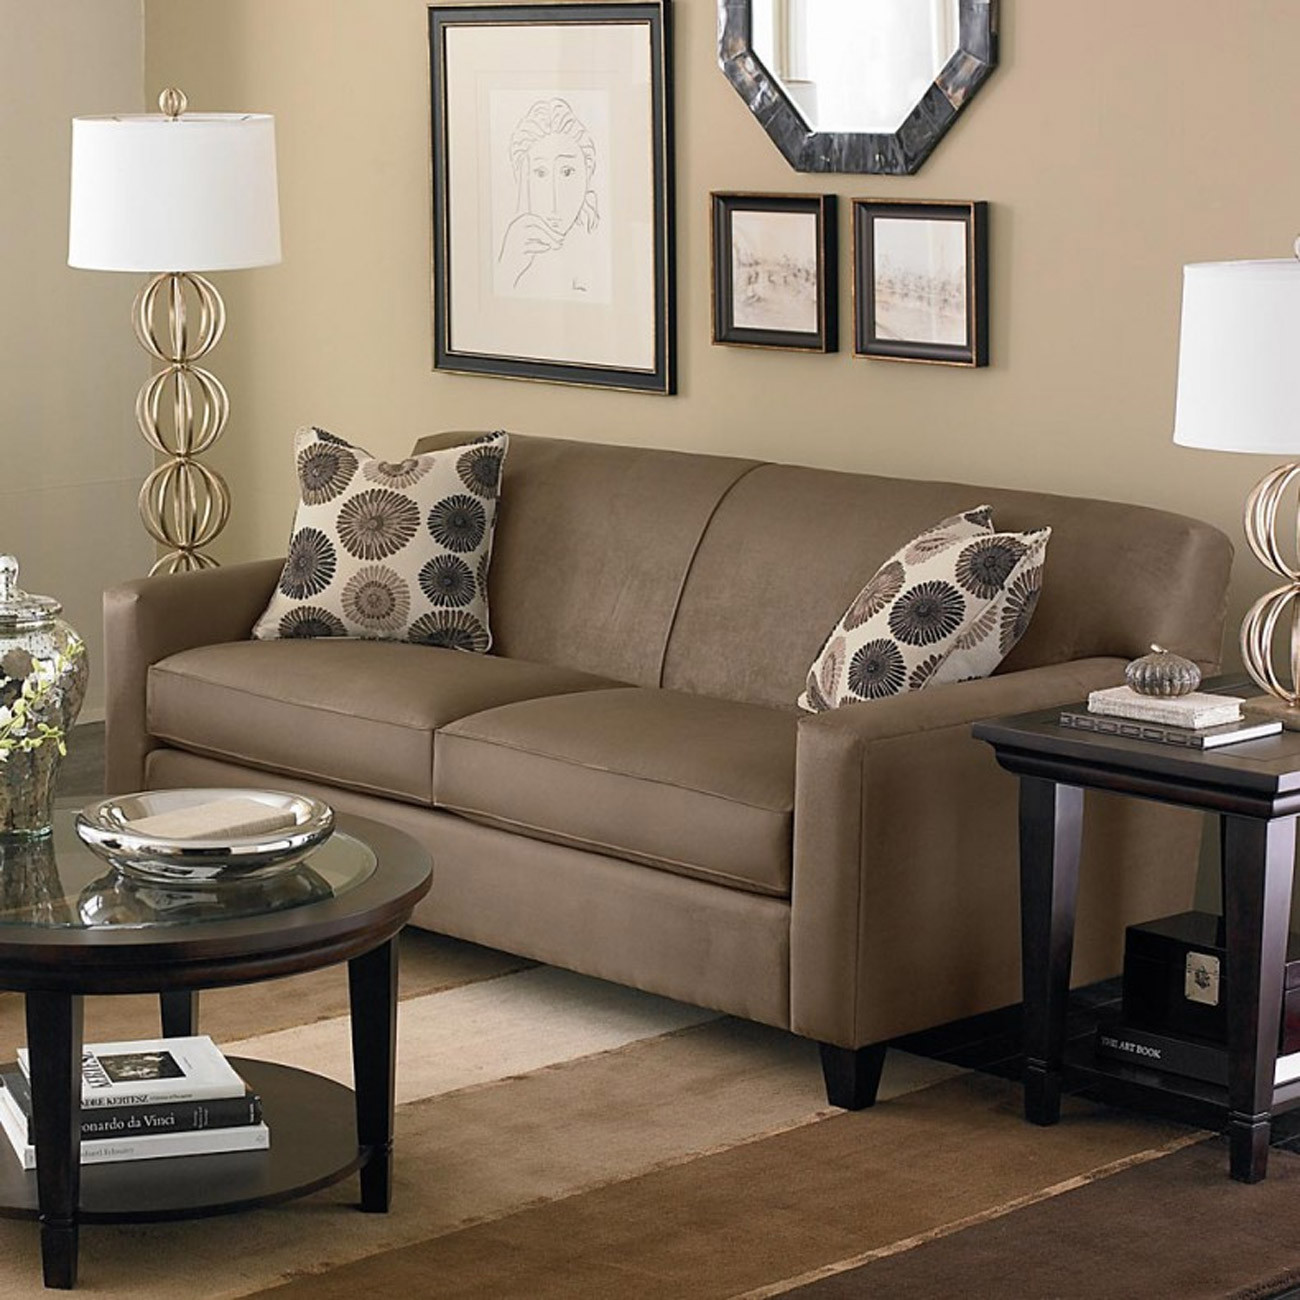 Living Room Sofas Ideas
 Find Suitable Living Room Furniture With Your Style